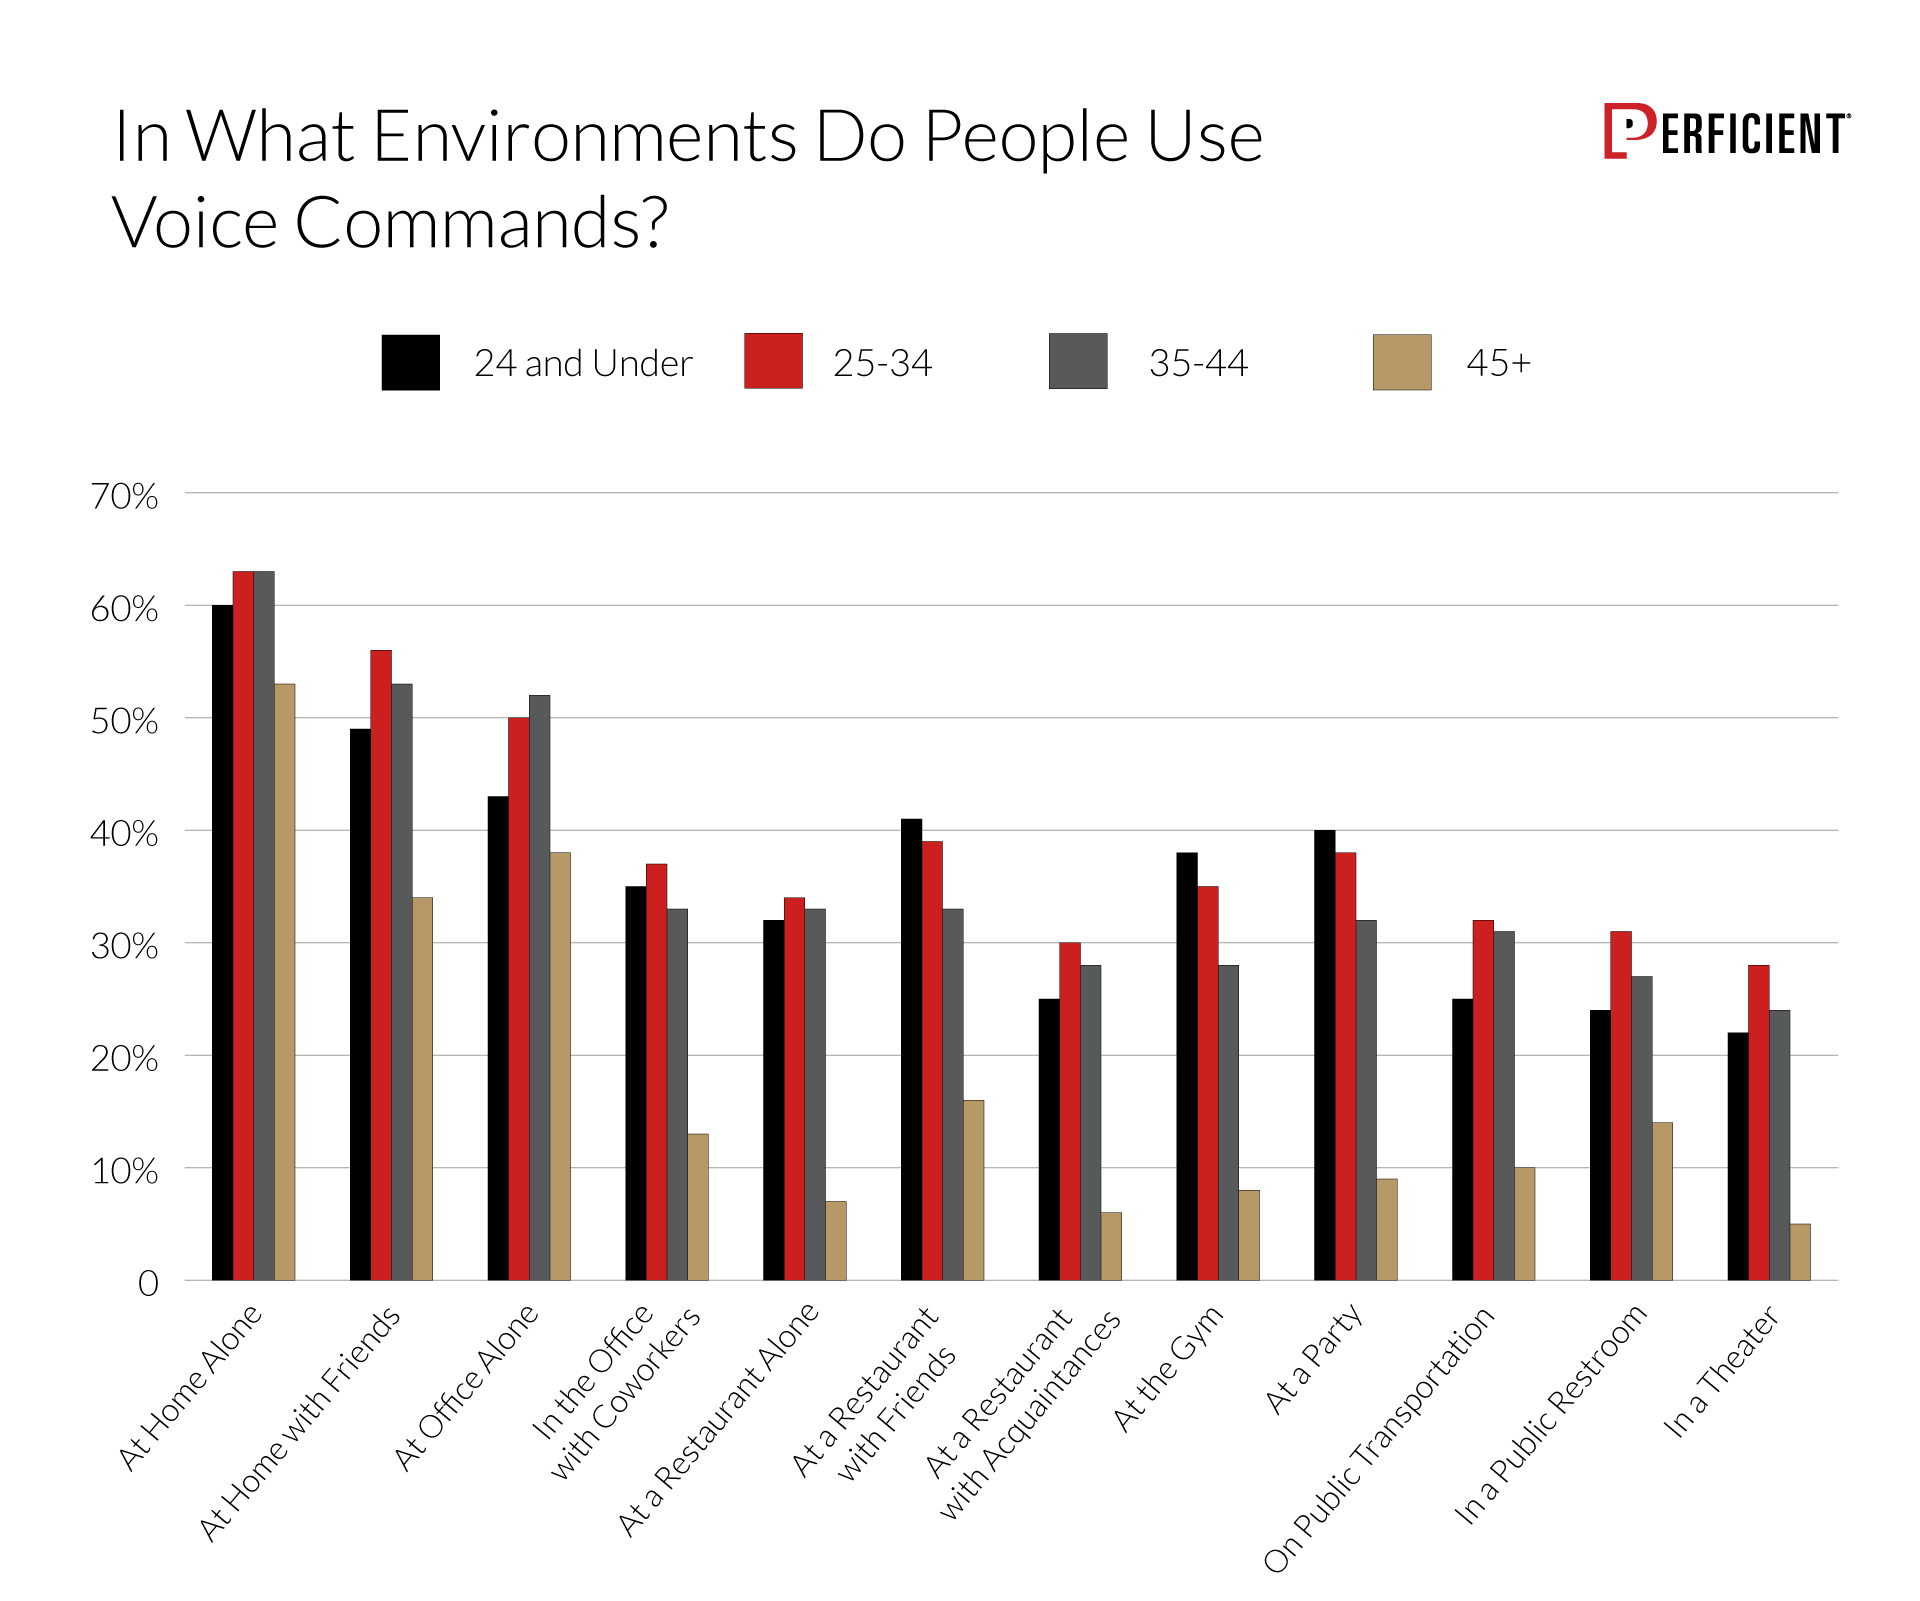 Chart shows how likely people are to use voice commands in certain environments, by age group